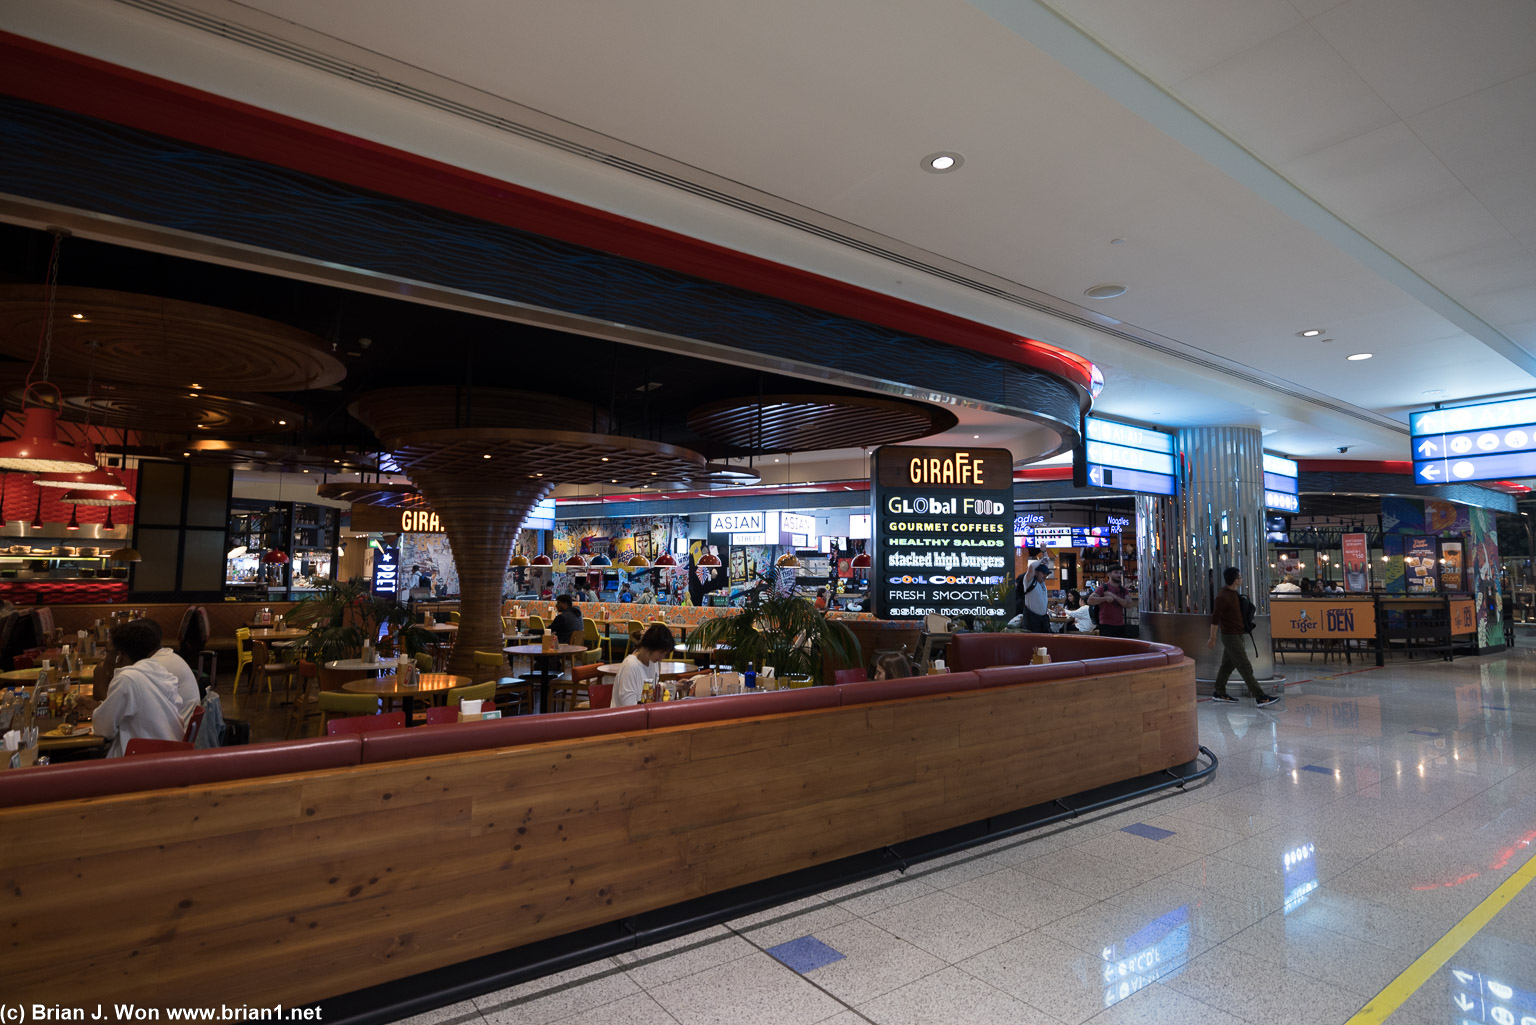 Food court by gate A21.